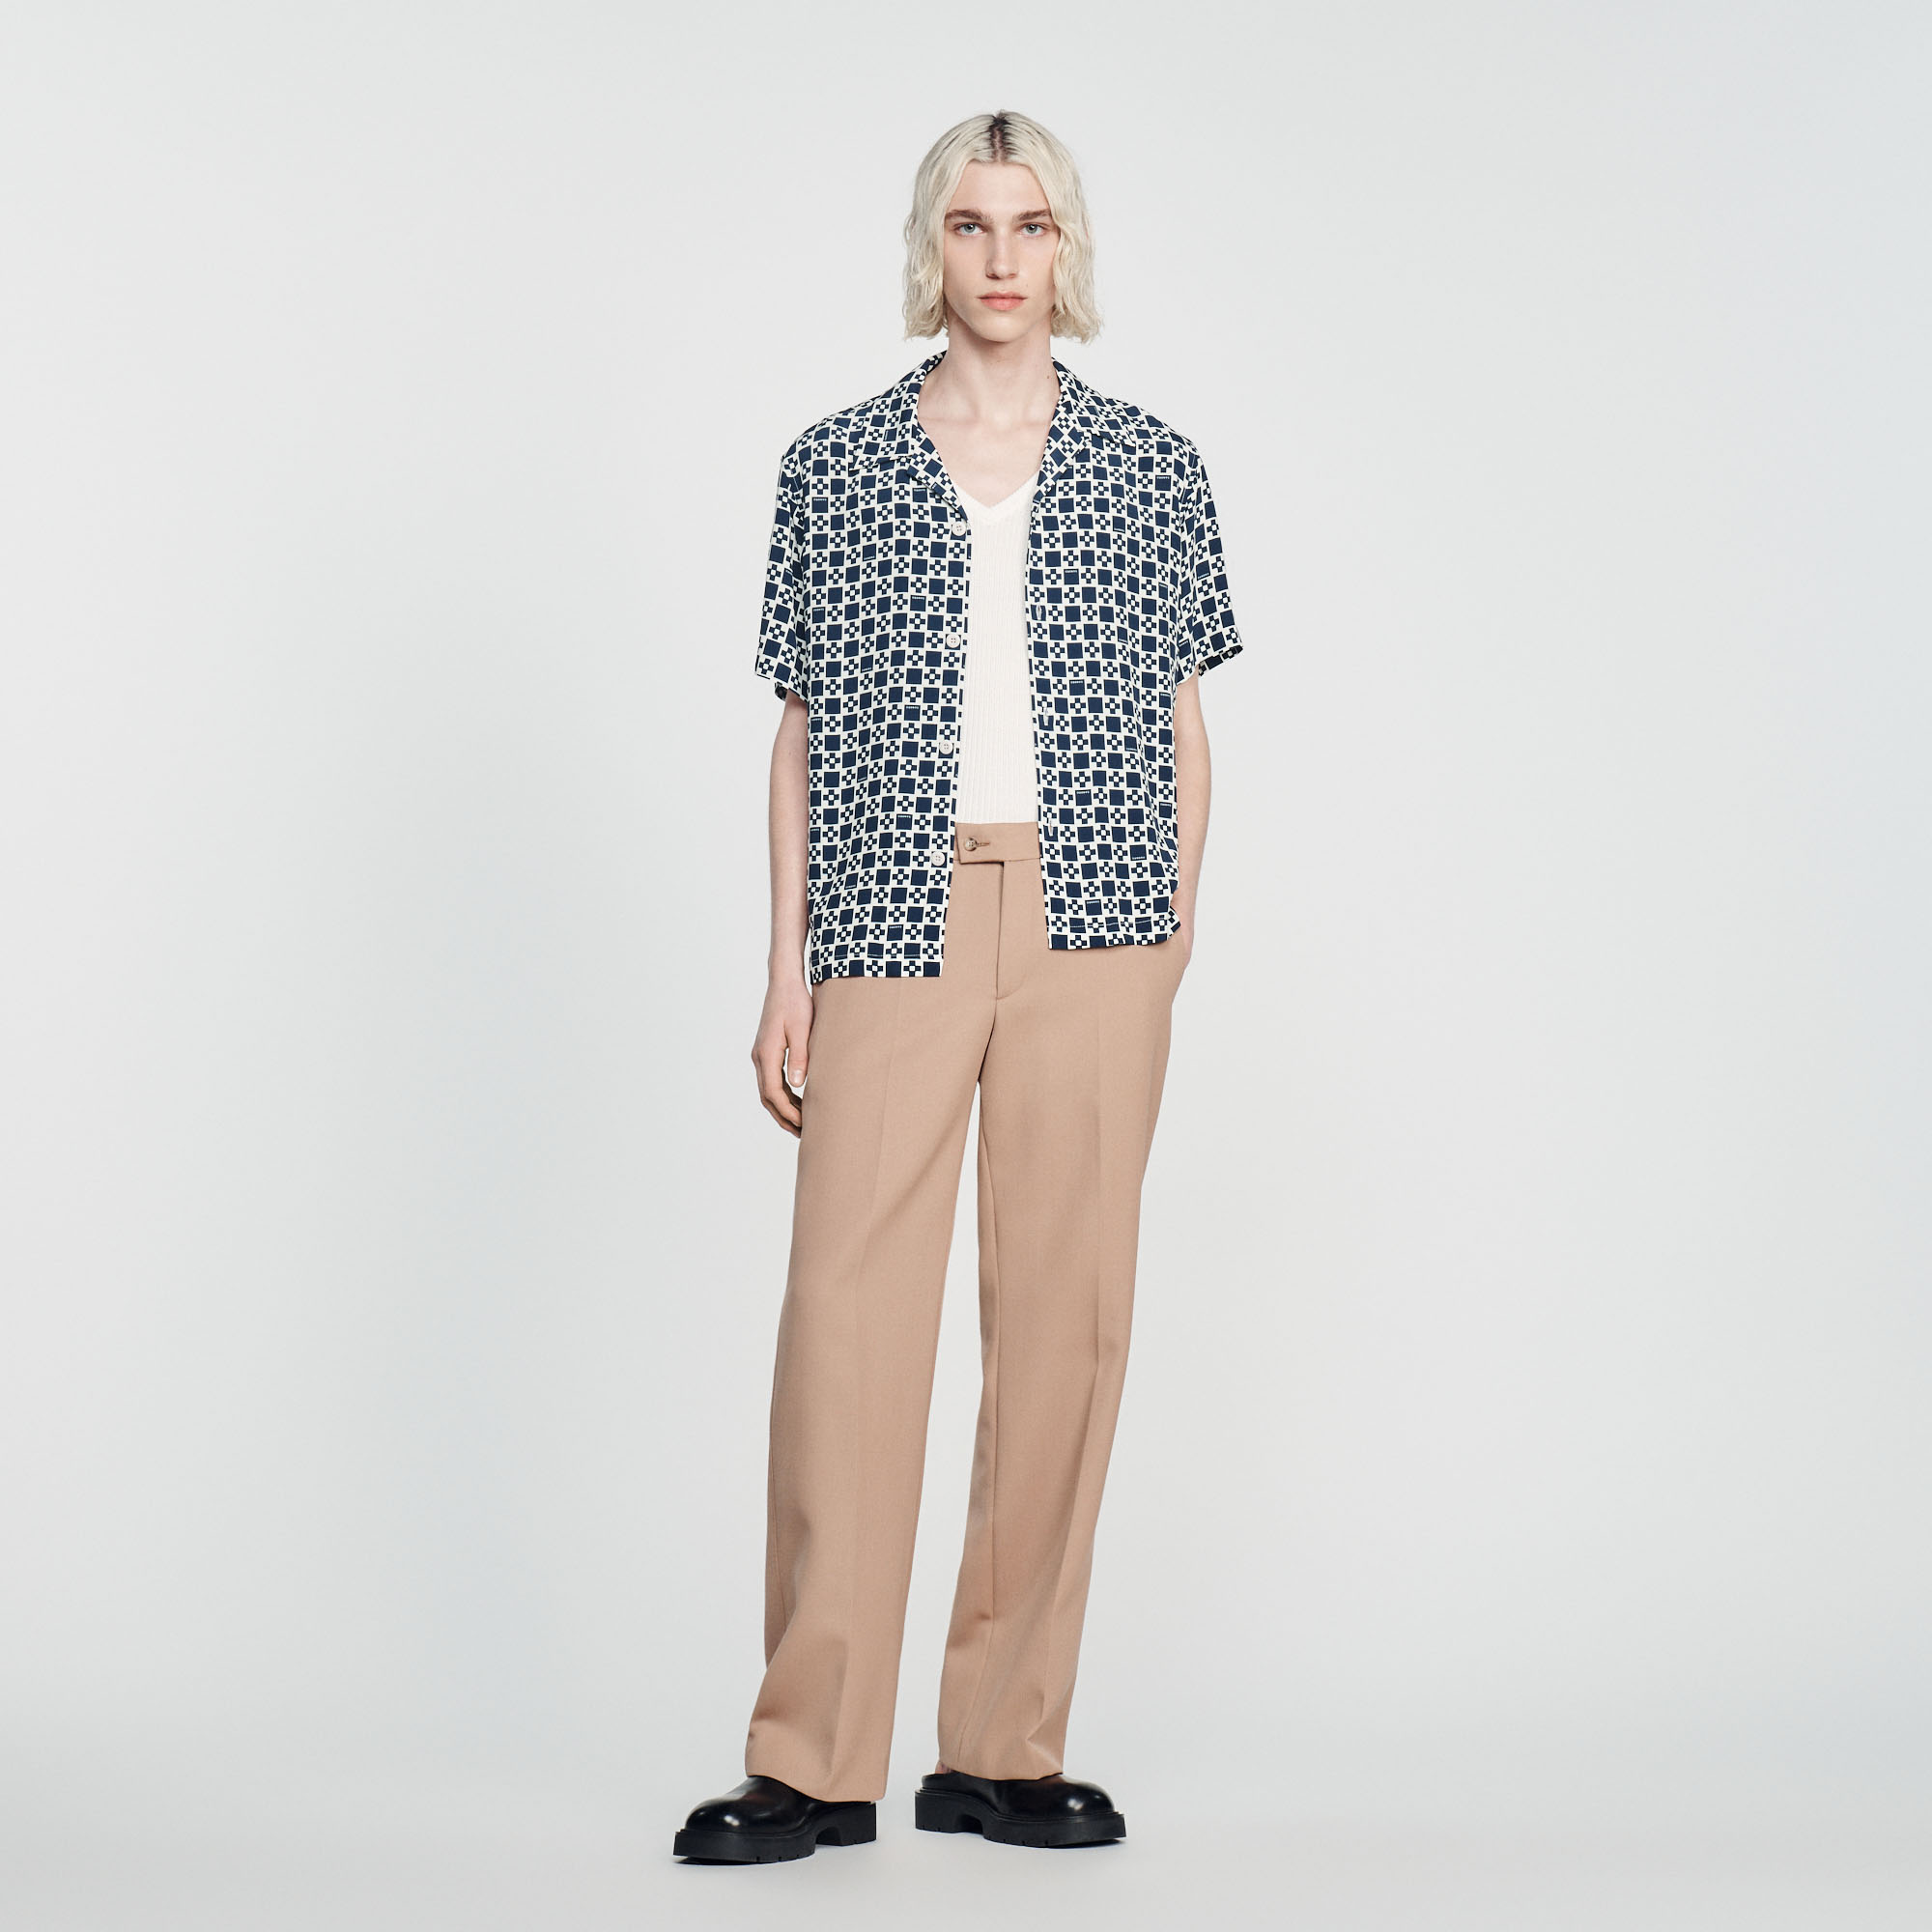 Sandro viscose Flowing buttoned shirt with short sleeves, a spread collar, and an all-over Square Cross print